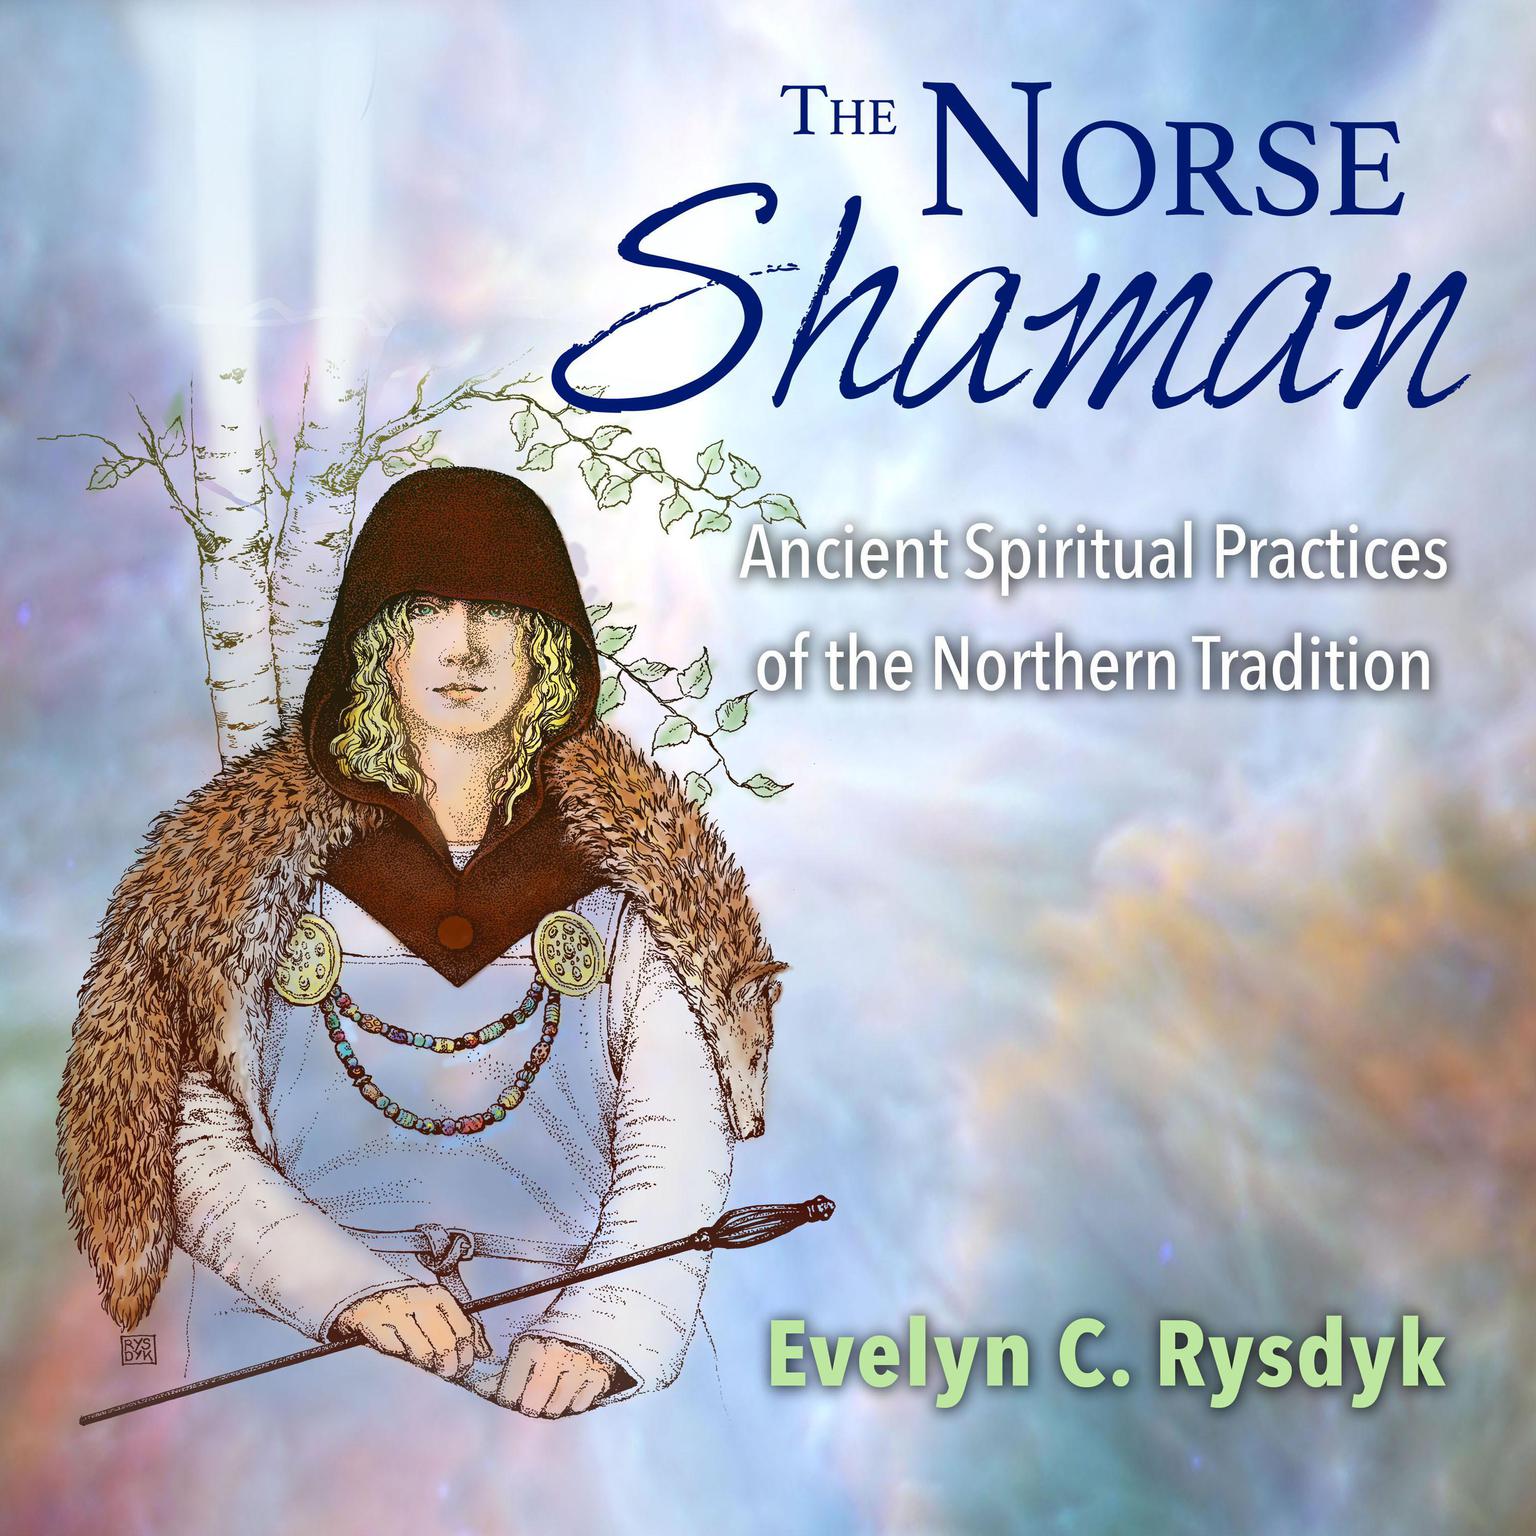 The Norse Shaman: Ancient Spiritual Practices of the Northern Tradition Audiobook, by Evelyn C. Rysdyk